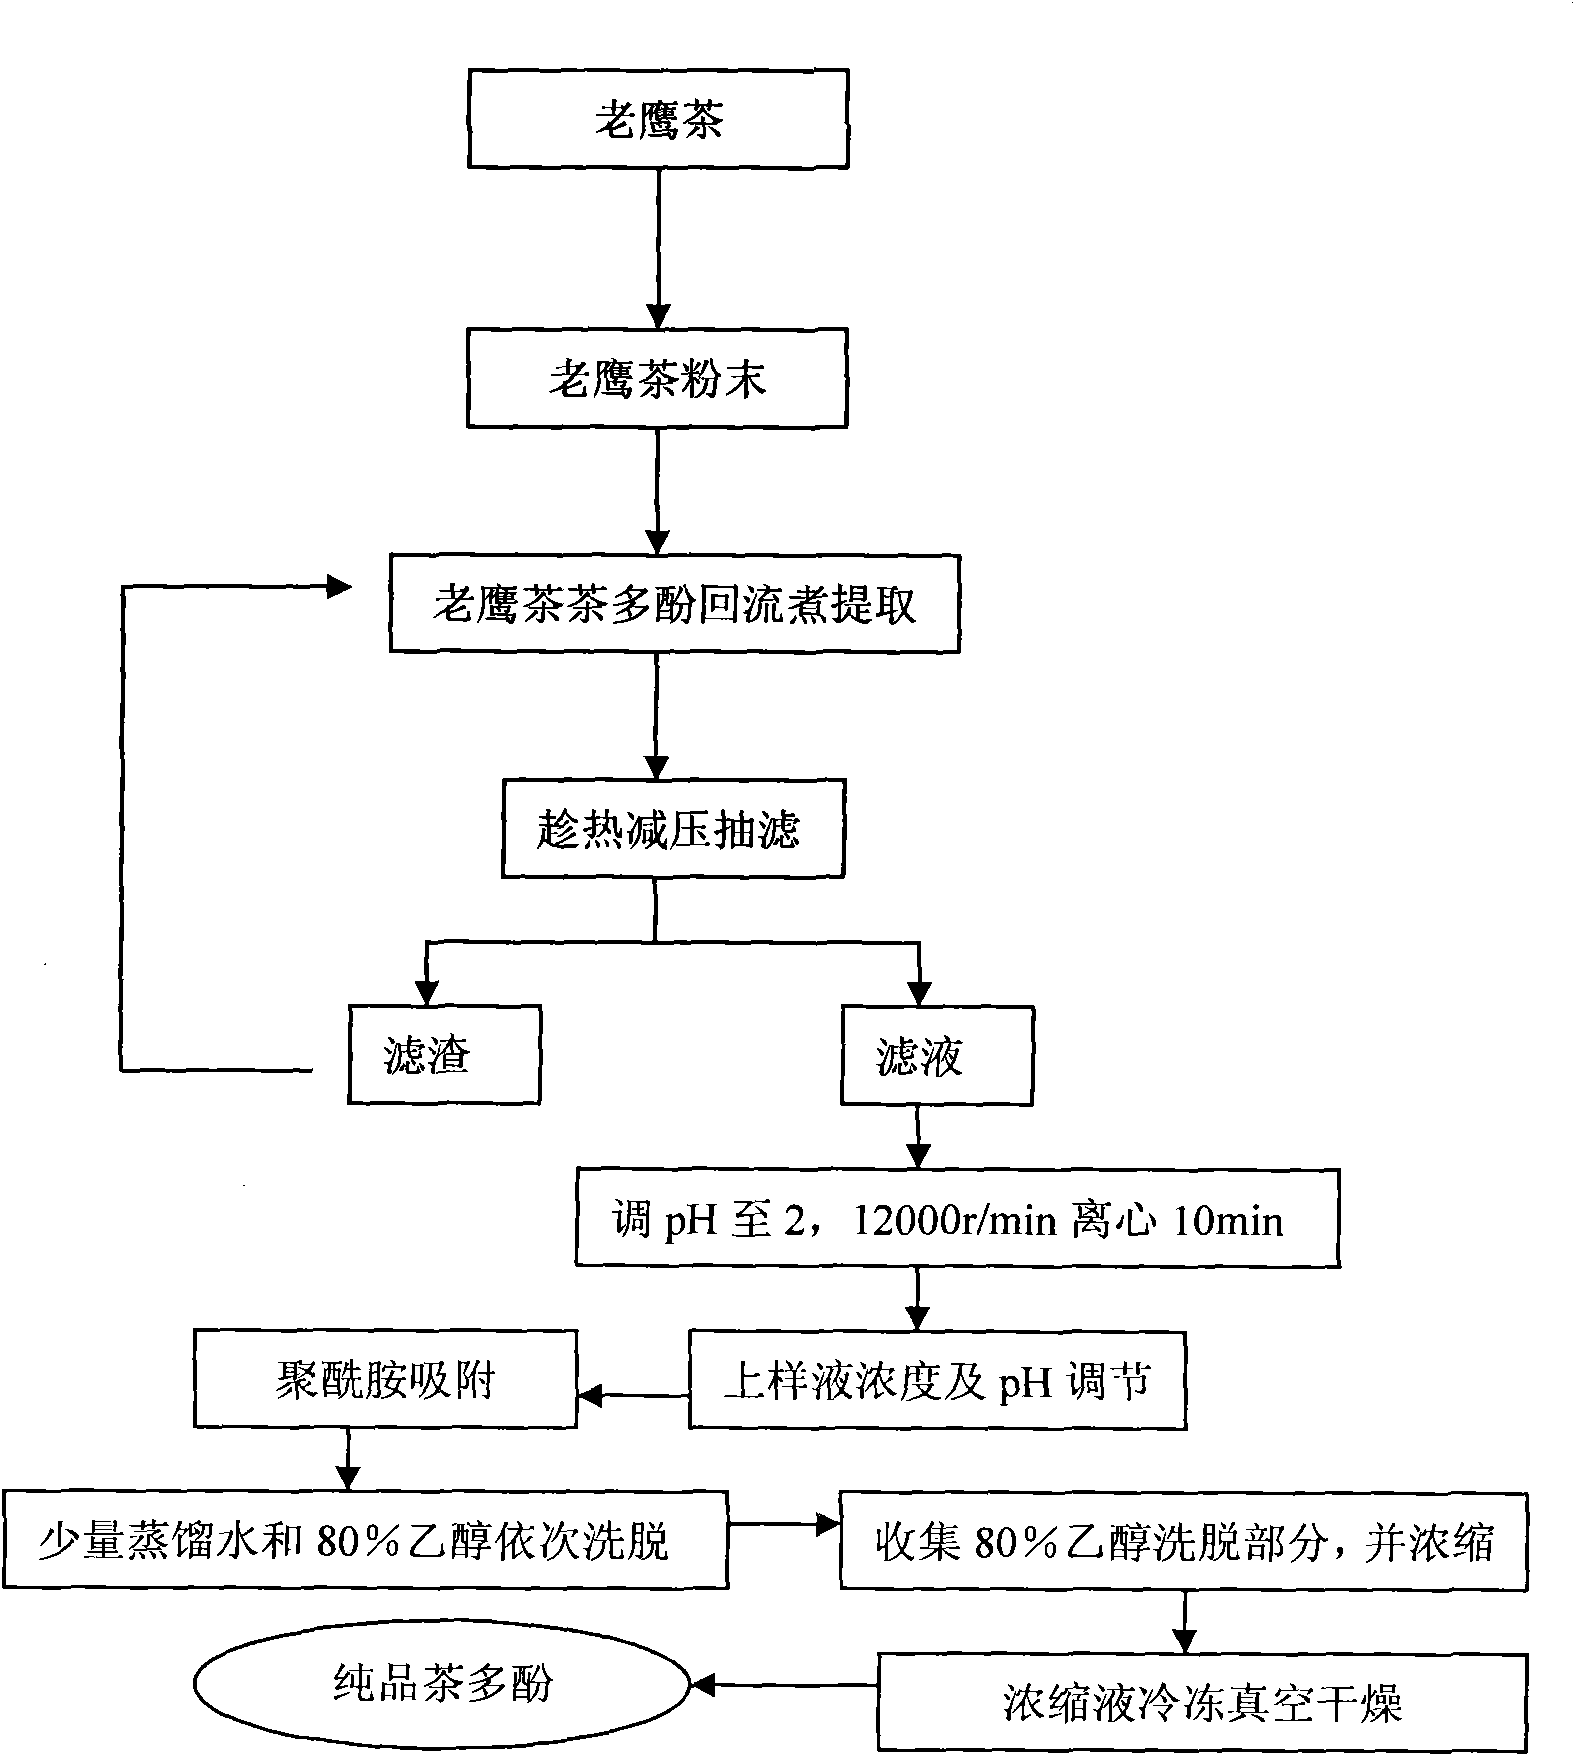 Method for extracting tea polyphenol from glede tea